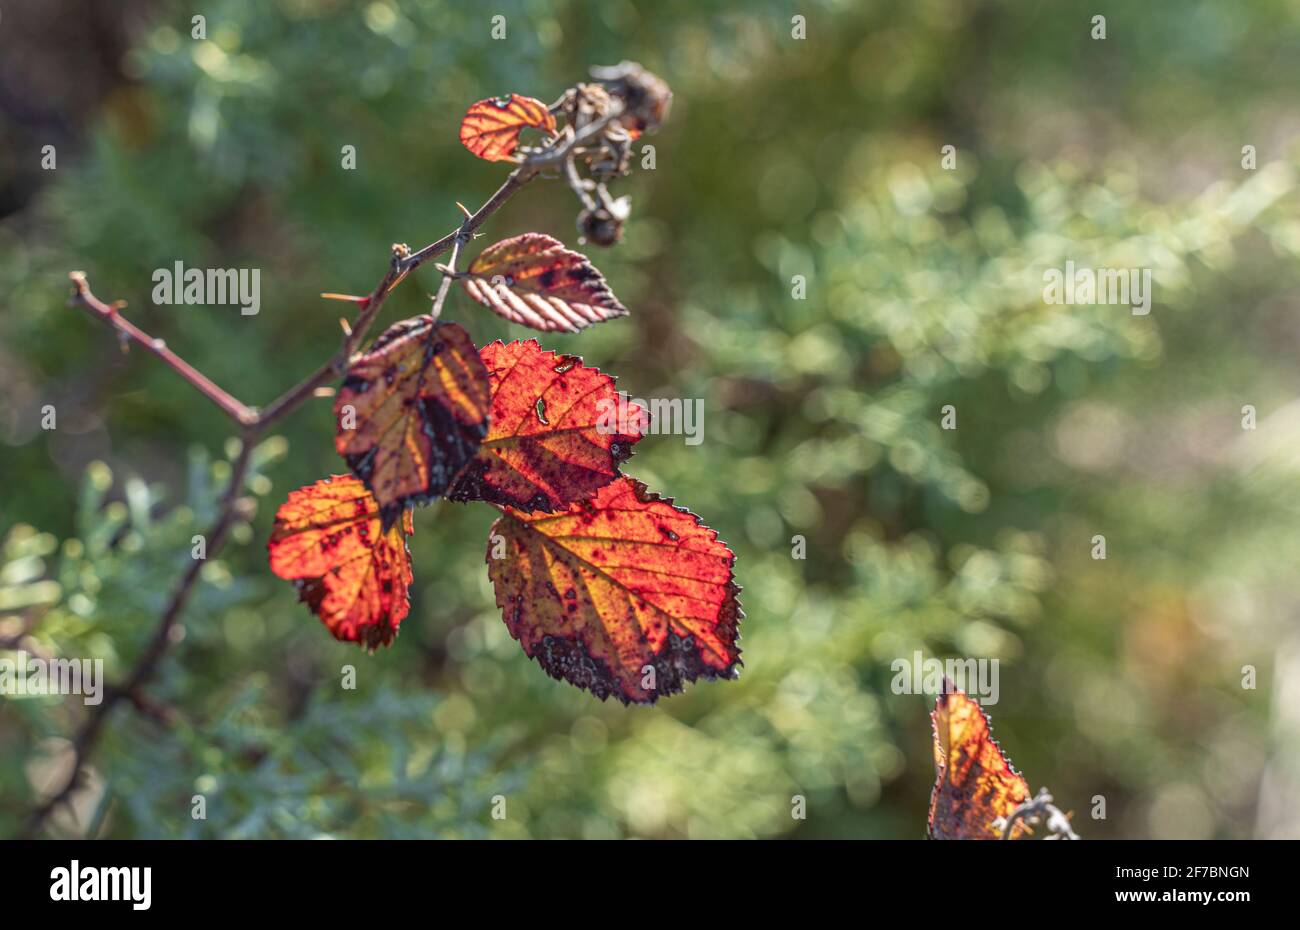 Branch and leaves of Bramble, (Rubus fruticosus), which turns red in autumn. Backlight and close up view, blurred green background. Stock Photo